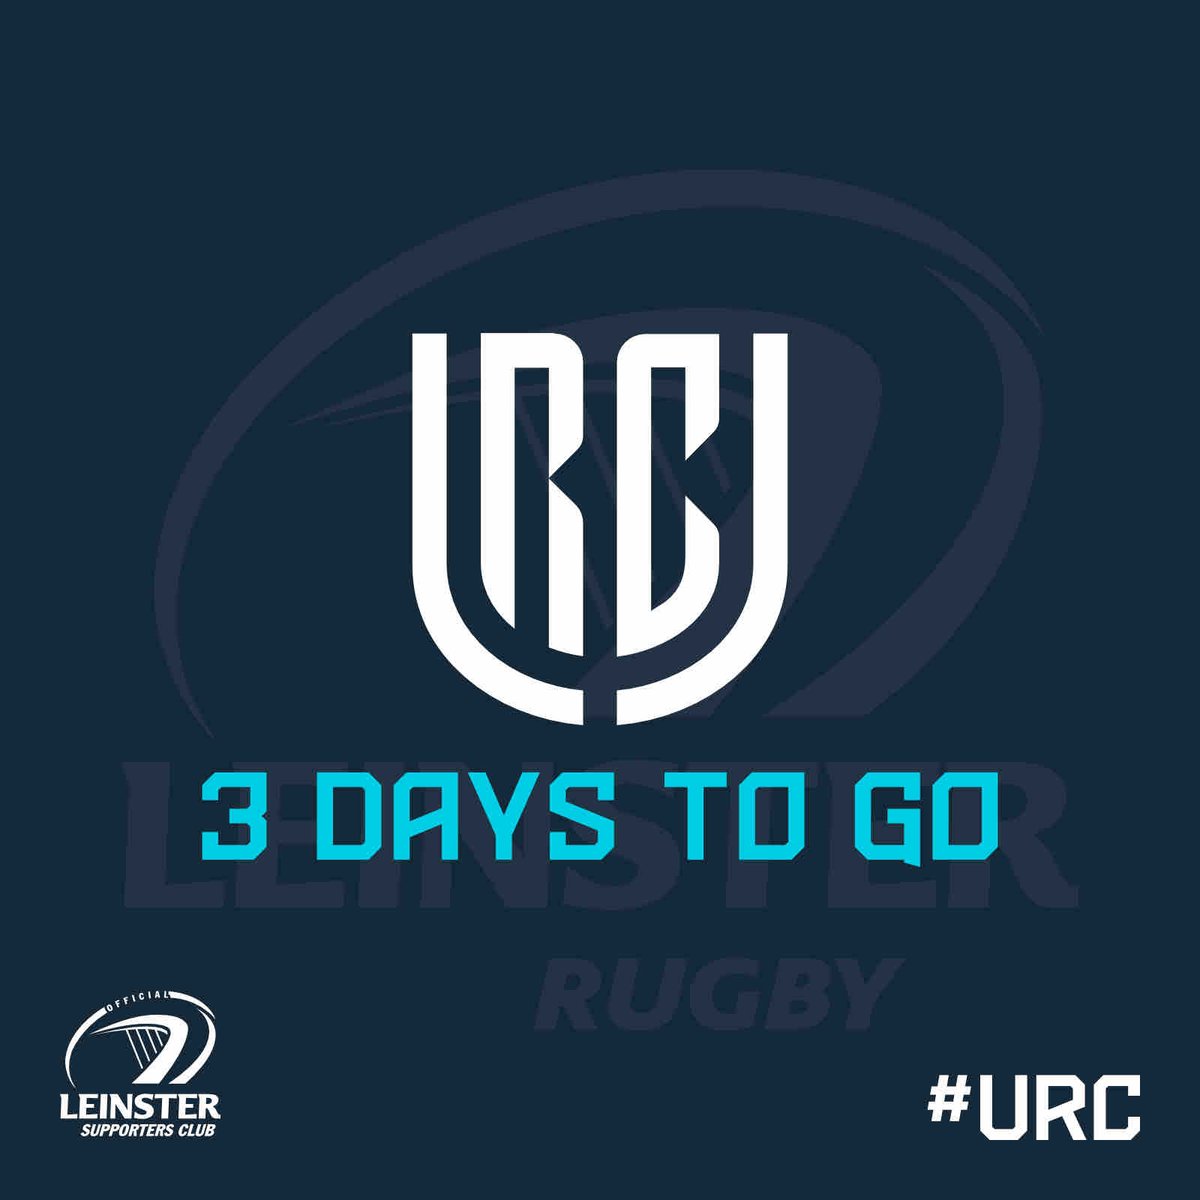 Back to the RDS this weekend for URC action #COYBIB